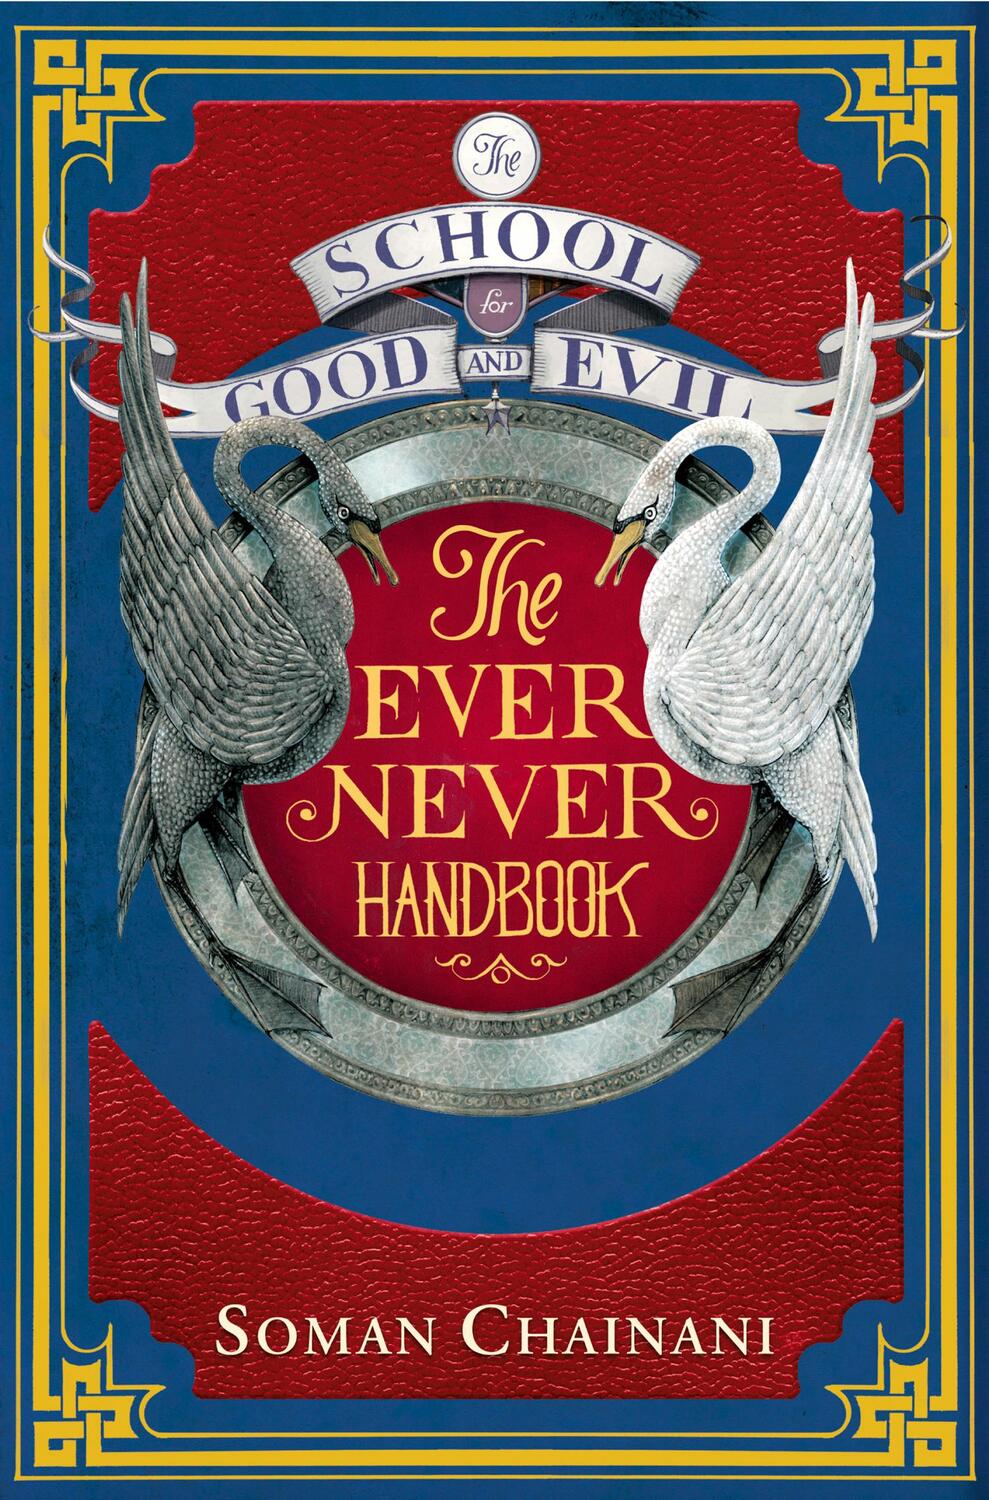 Cover: 9780008181796 | The School for Good and Evil: The Ever Never Handbook | Soman Chainani